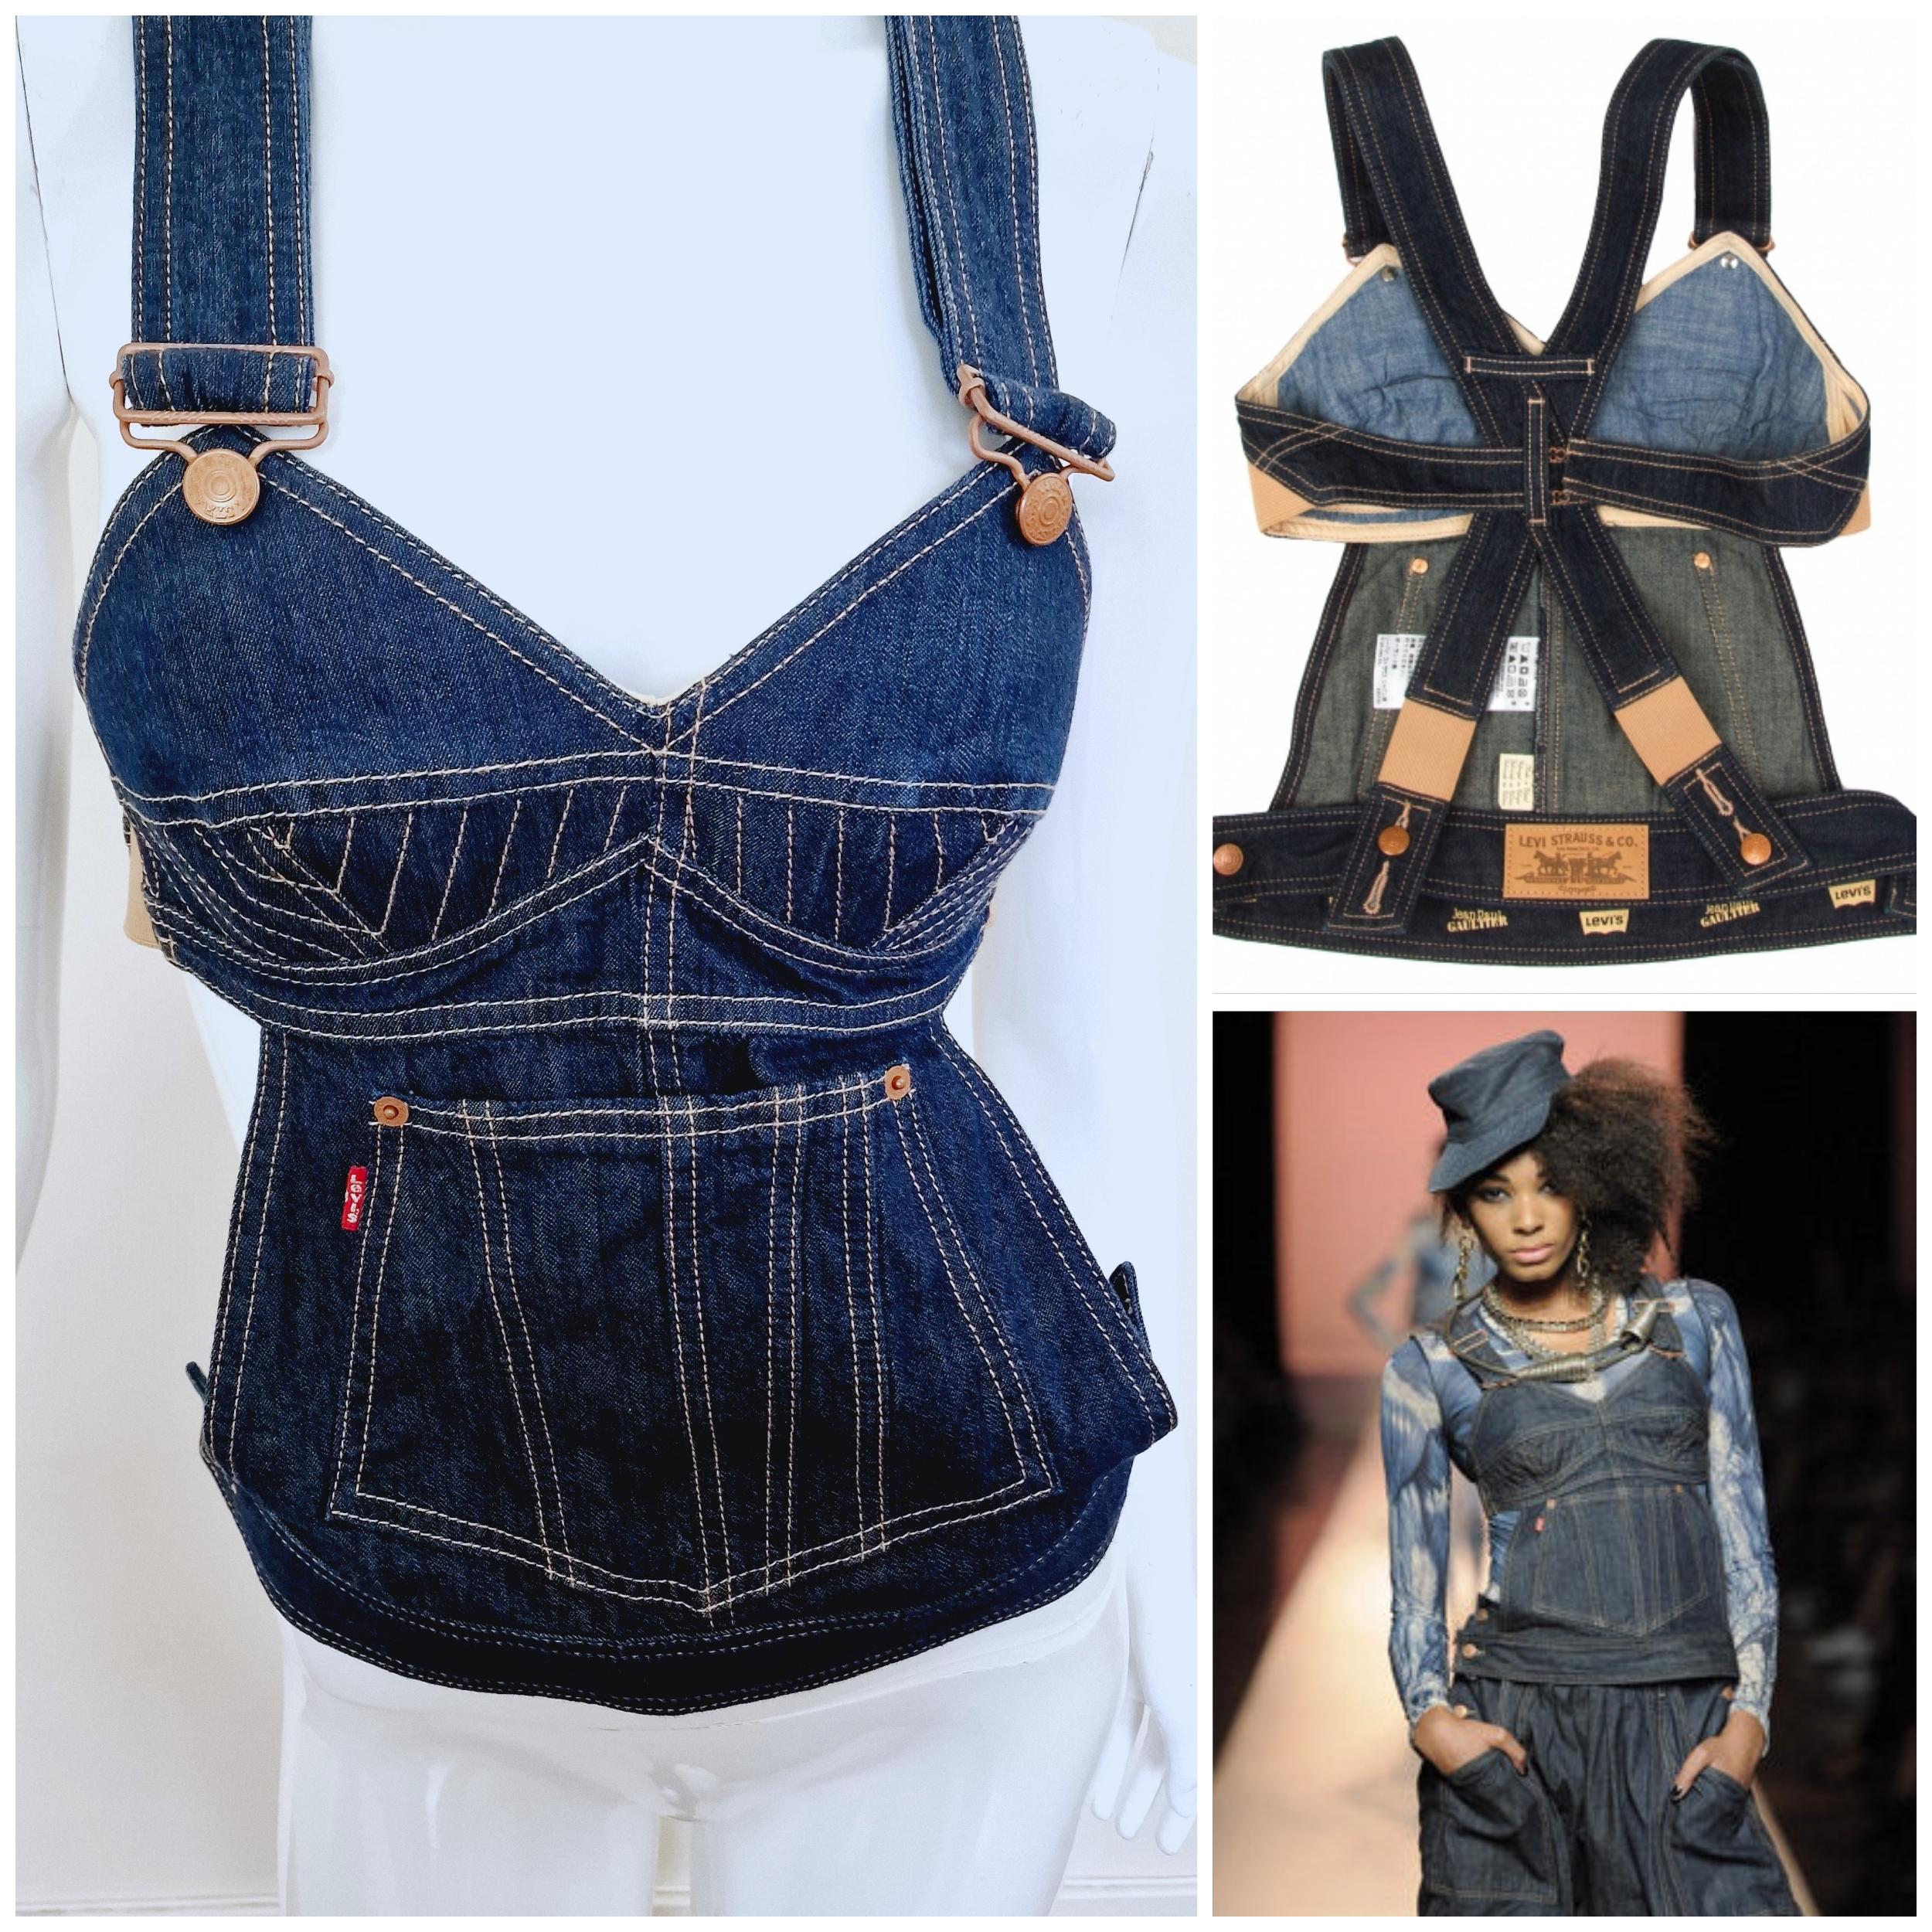 Jean Paul Gaultier X Levi's bustier!
From the Spring Summer 2010 collection!
Runway piece!
Rhianna wore it as well with denim skirt & pants.
EXCELLENT condition!

100% cotton.
Made in Poland.

SIZE
Fits: from XS to S.
Marked size: XS.
Length: 52 cm